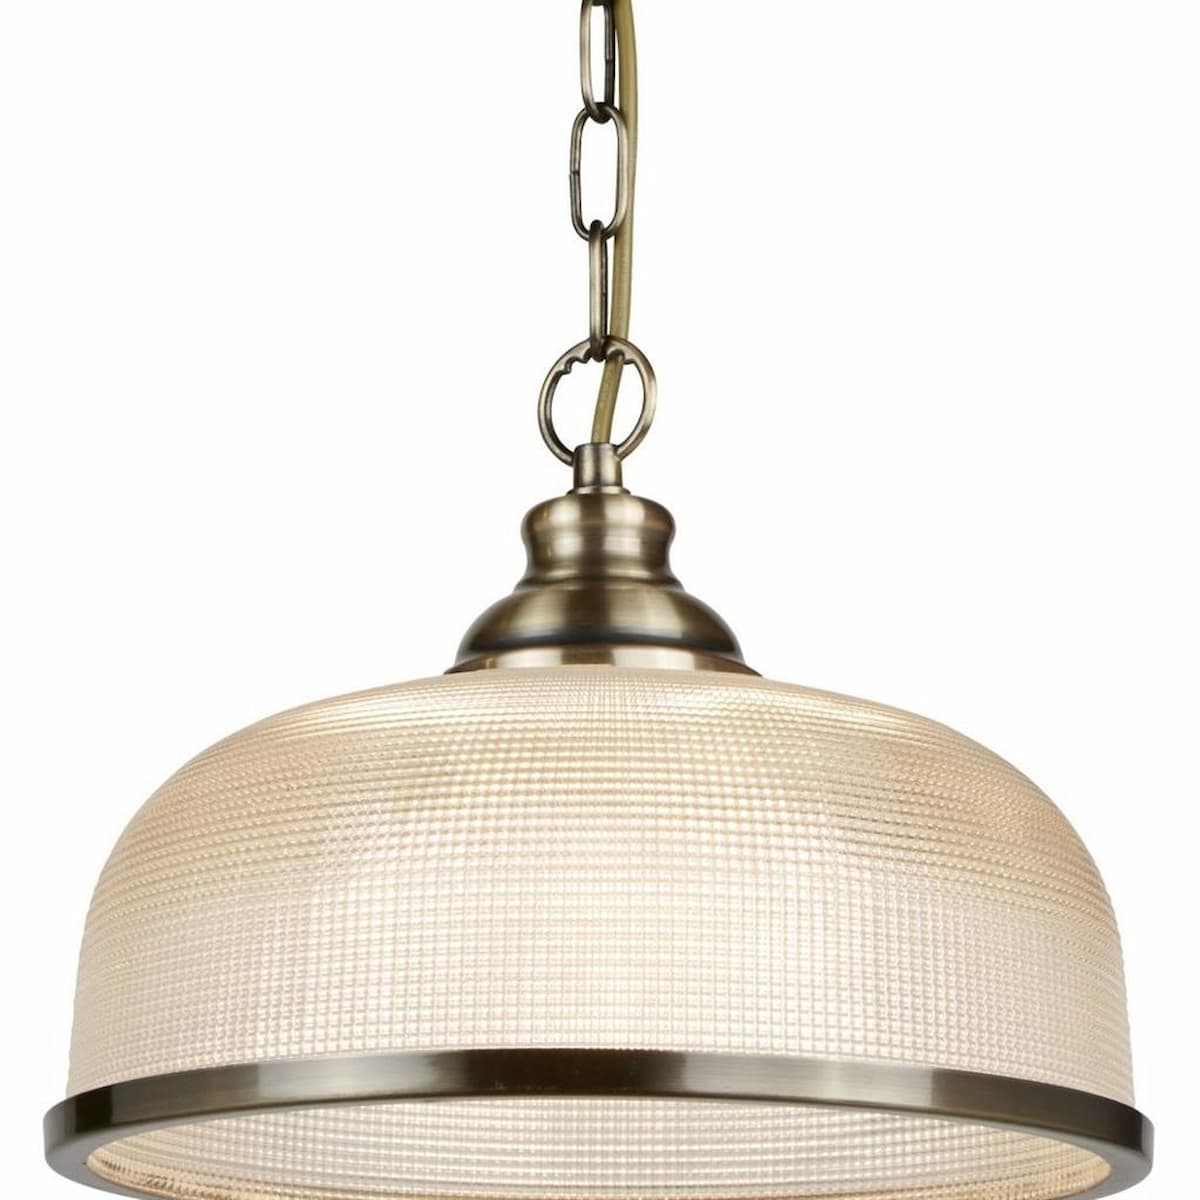 SEARCHLIGHT BISTRO II PENDANT - ANTIQUE BRASS & HOLOPHANE STYLE GLASS- 1682AB